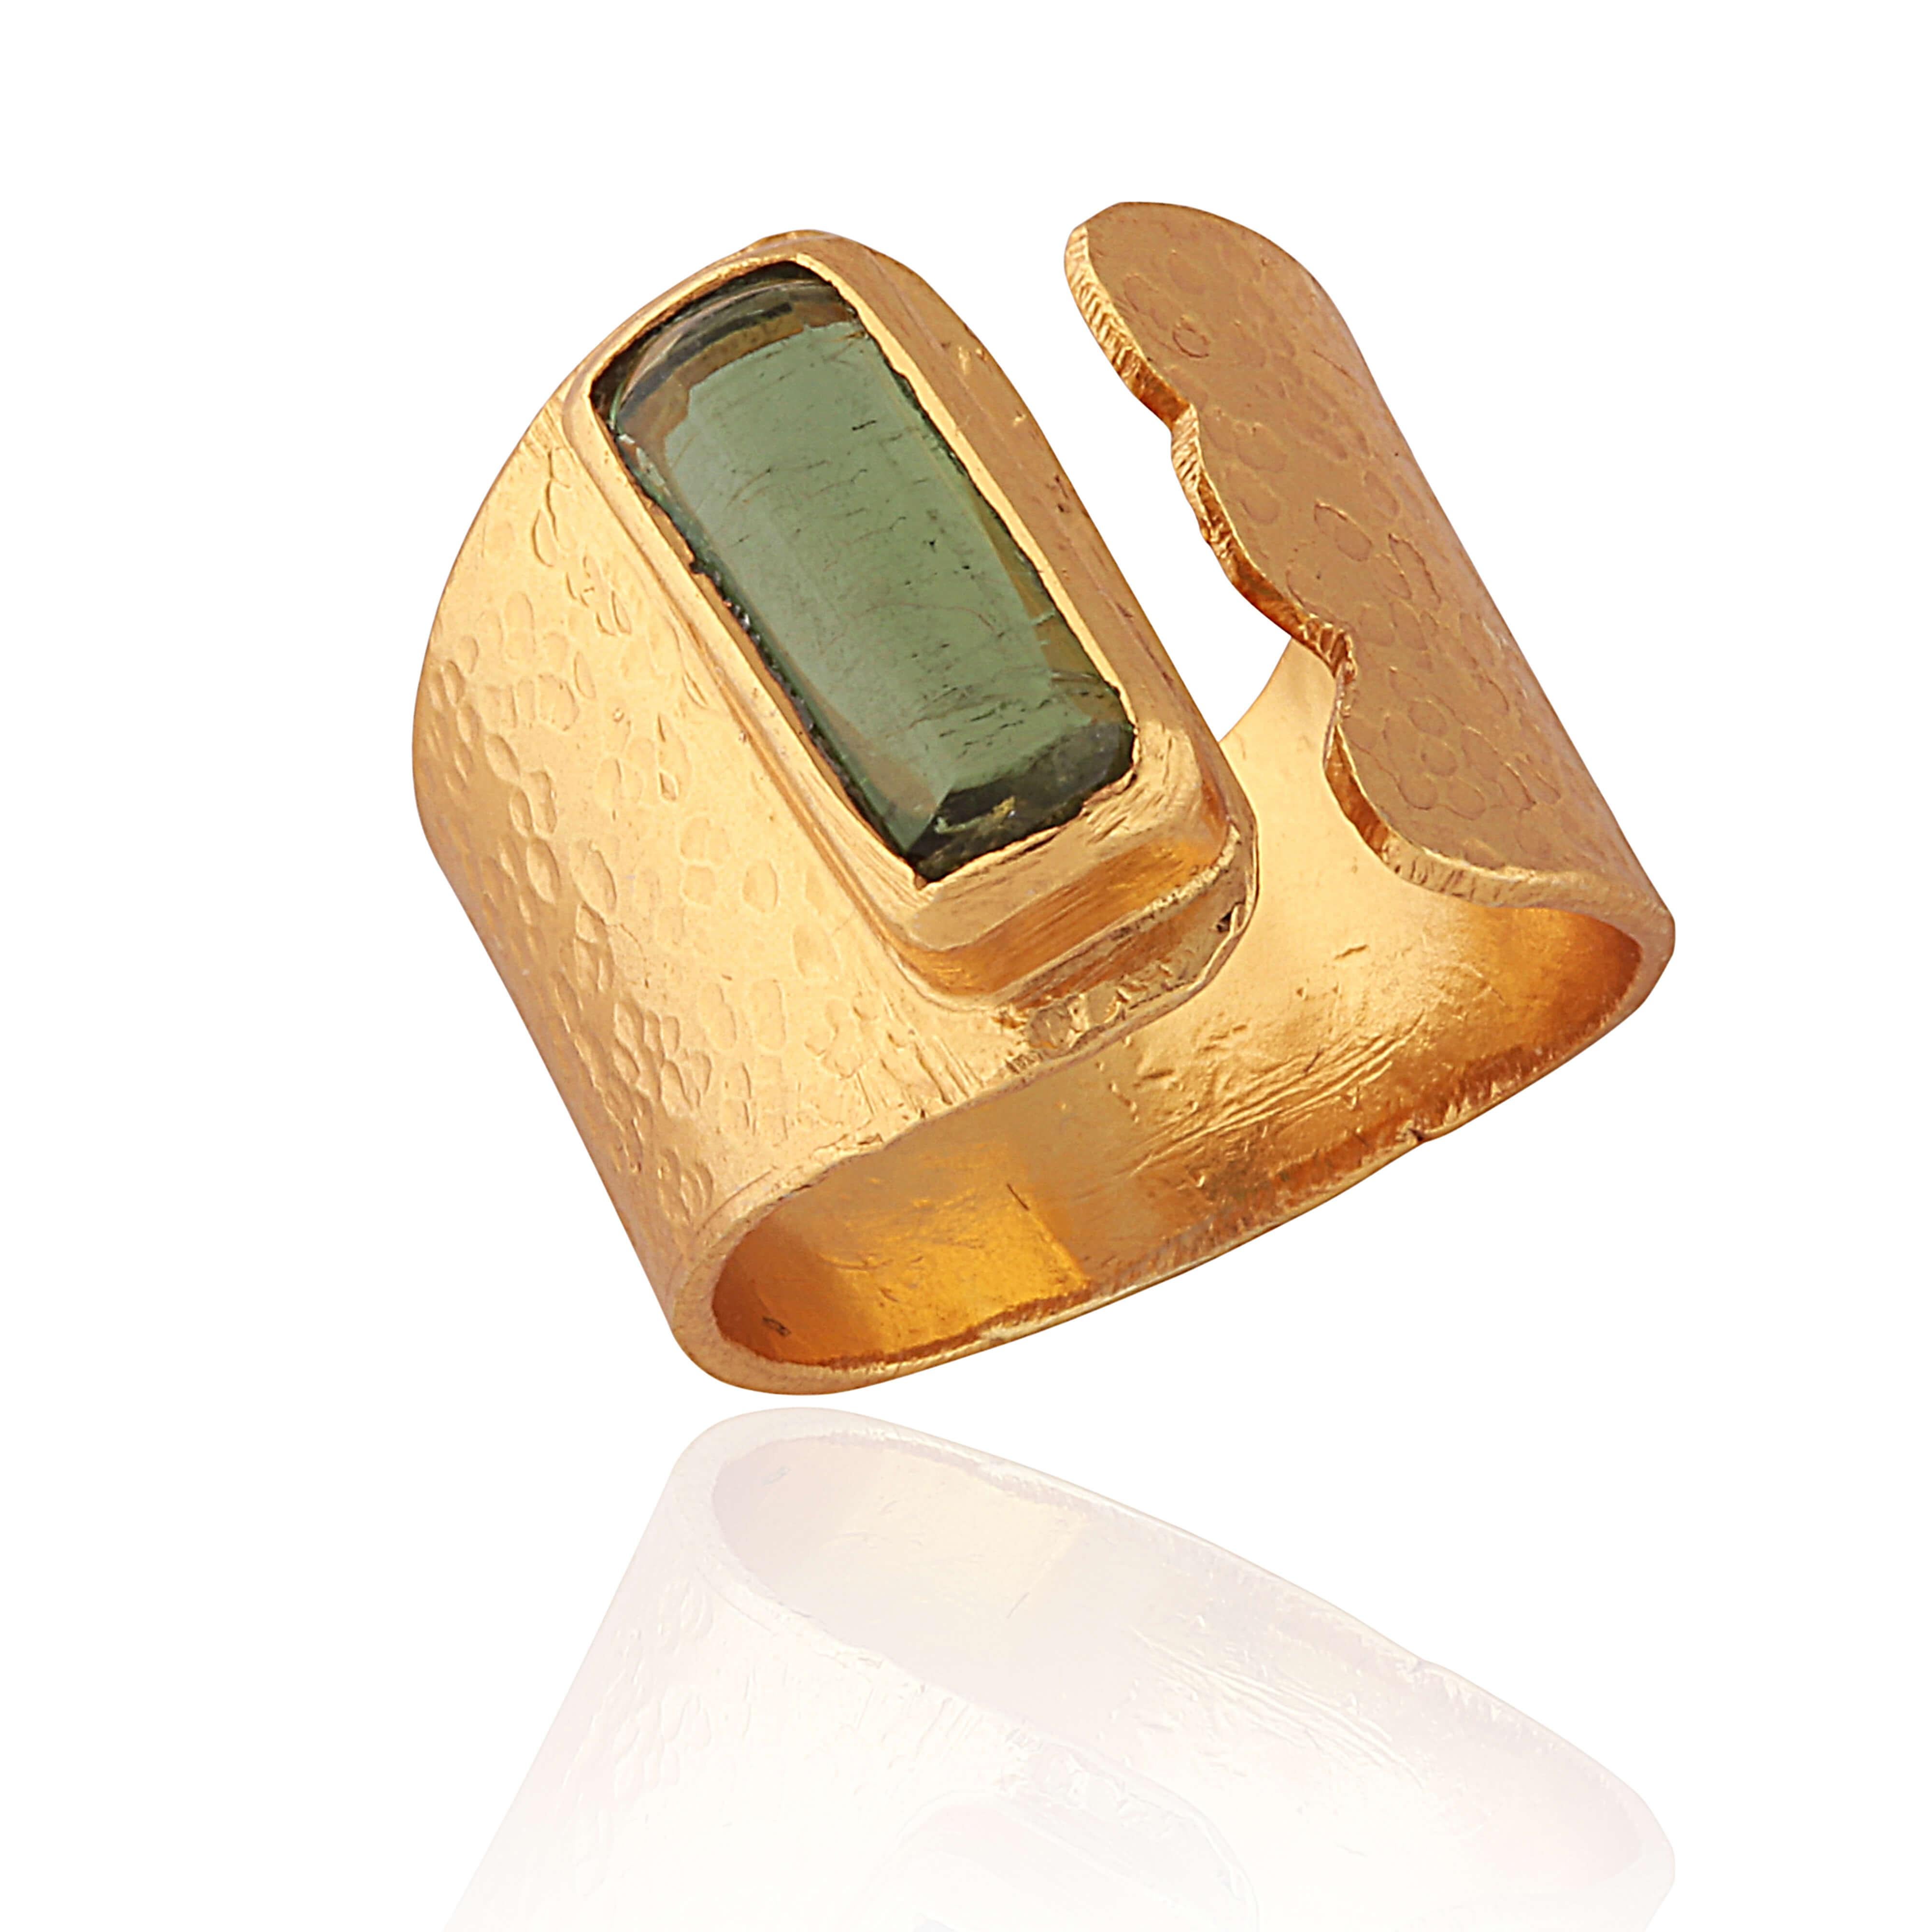 A beautiful art deco, on trend ring set with a striking tourmaline.

Has room for adjustment so the ring can fit various fingers.

Gold plated on silver.

UK Size P, 17.8mm